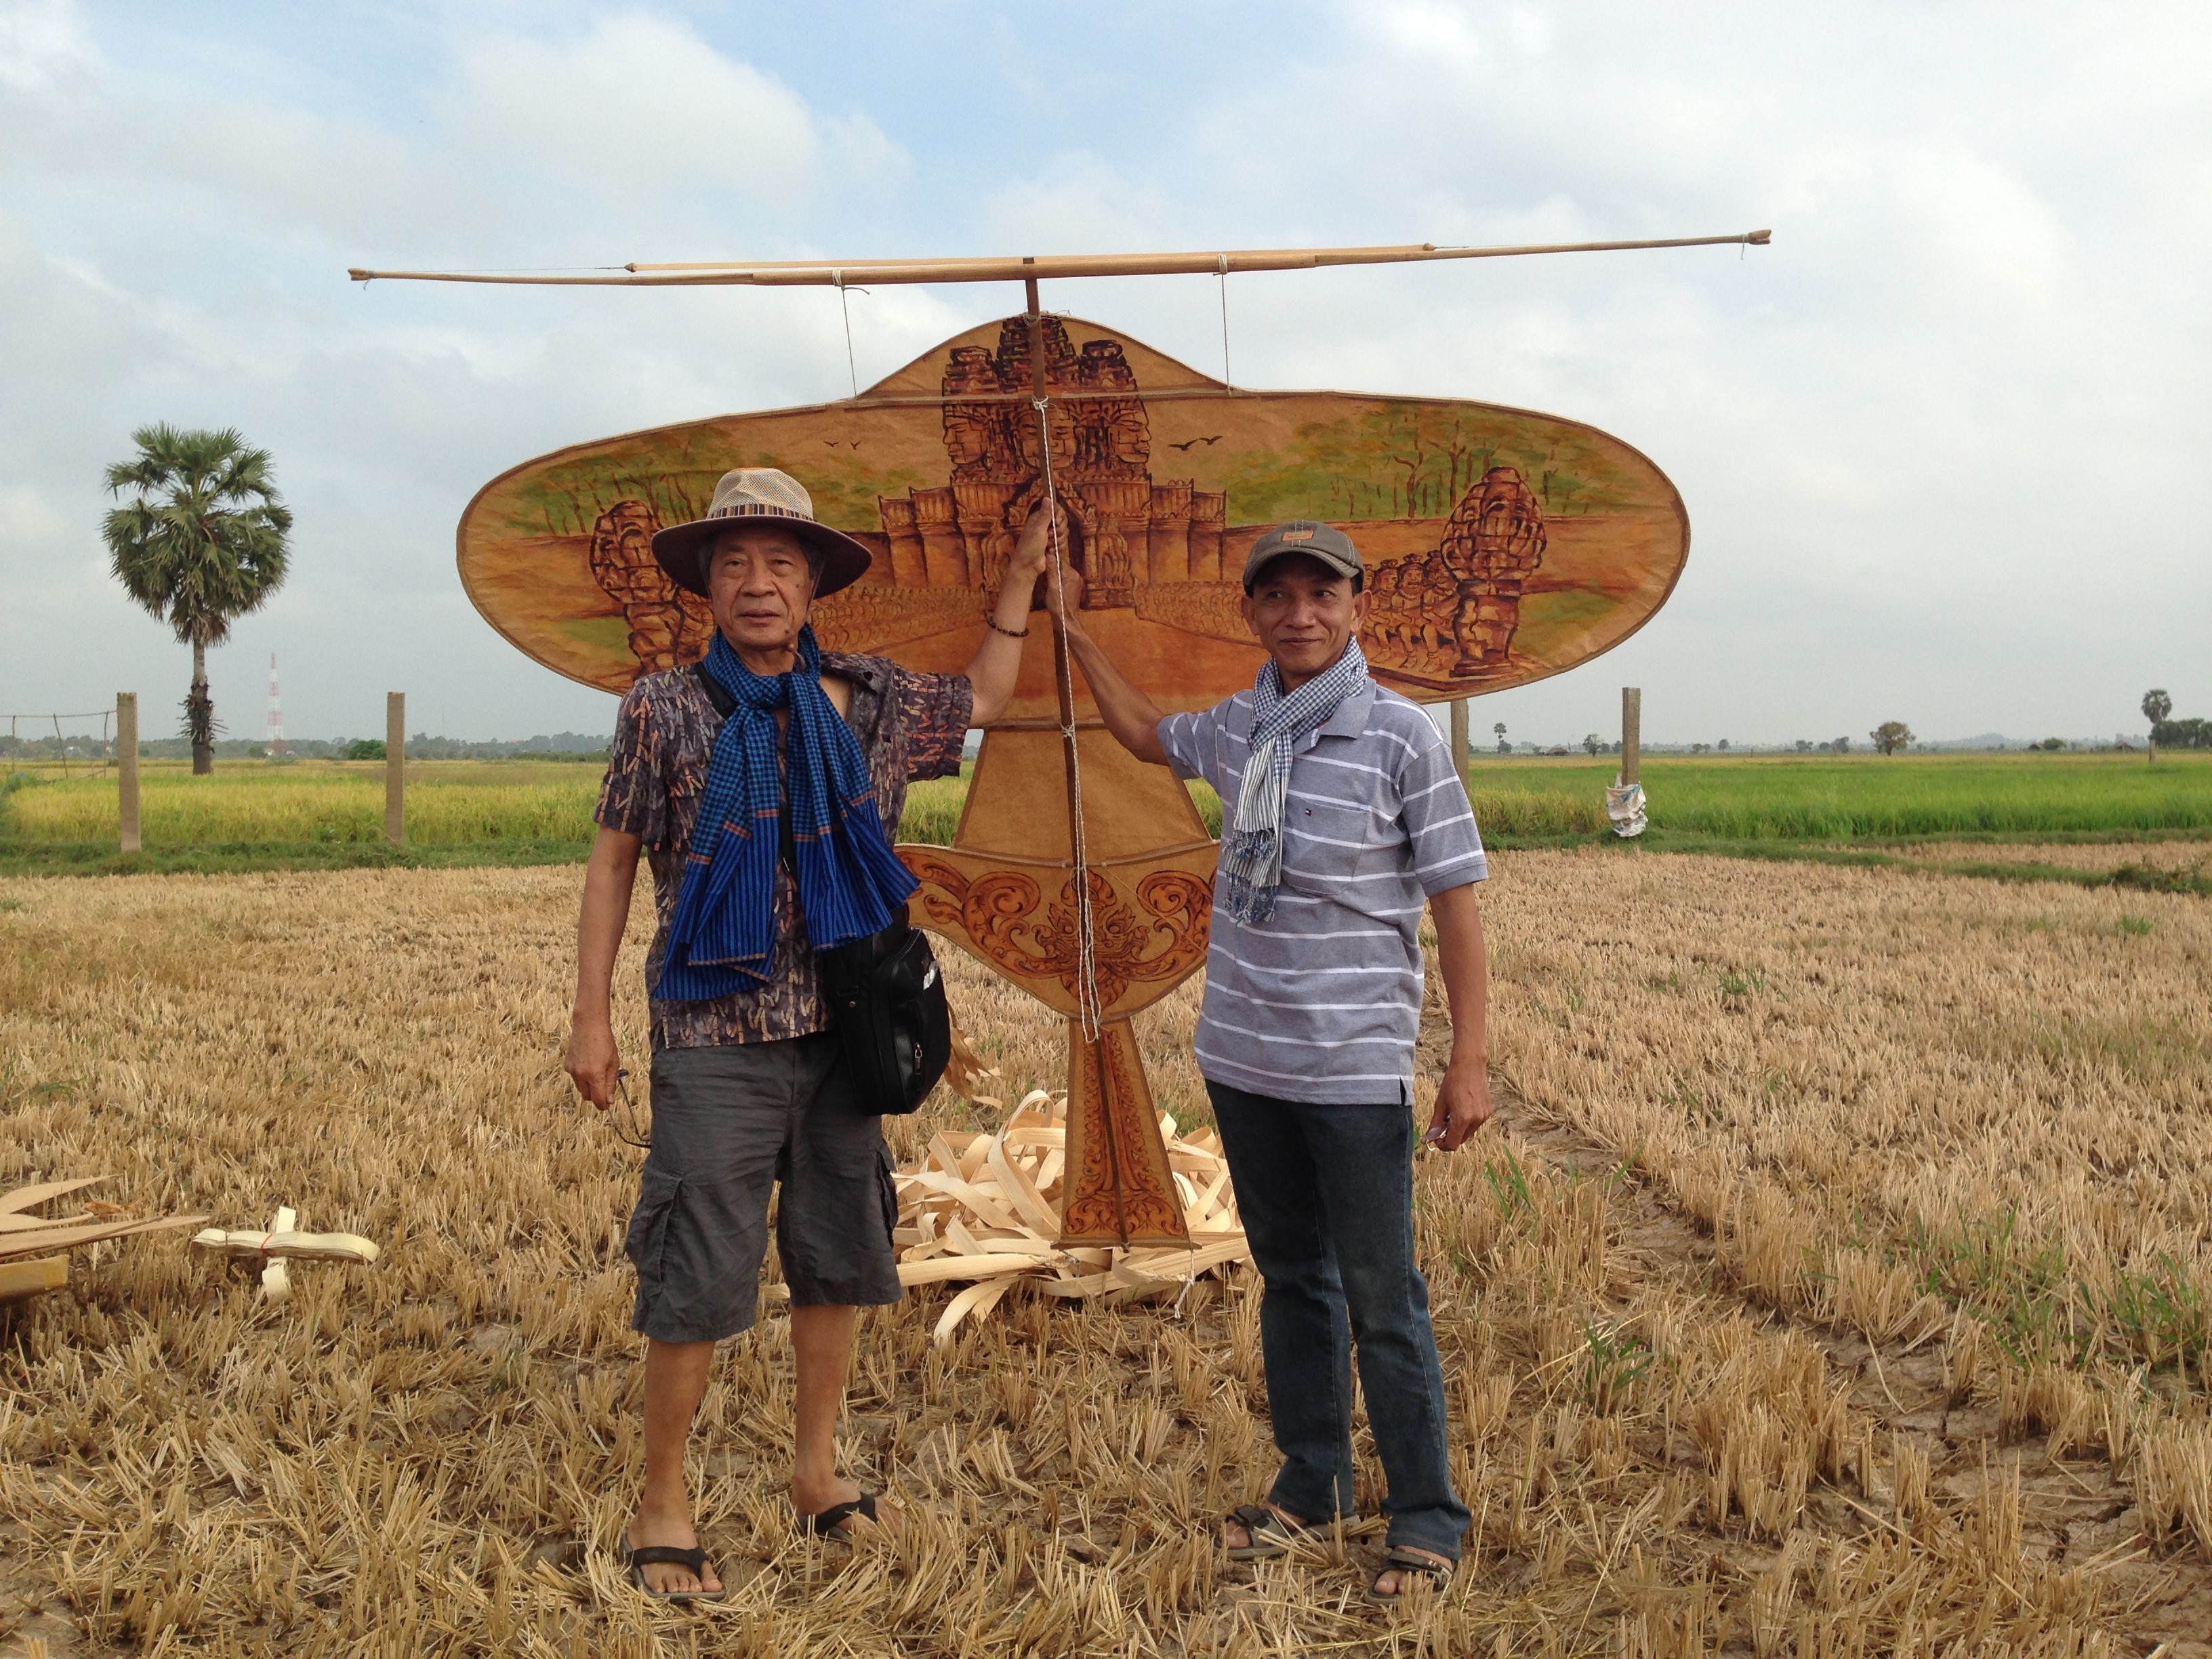 Chinary Ung and Yos Chandara with a Cambodian singing kite. 